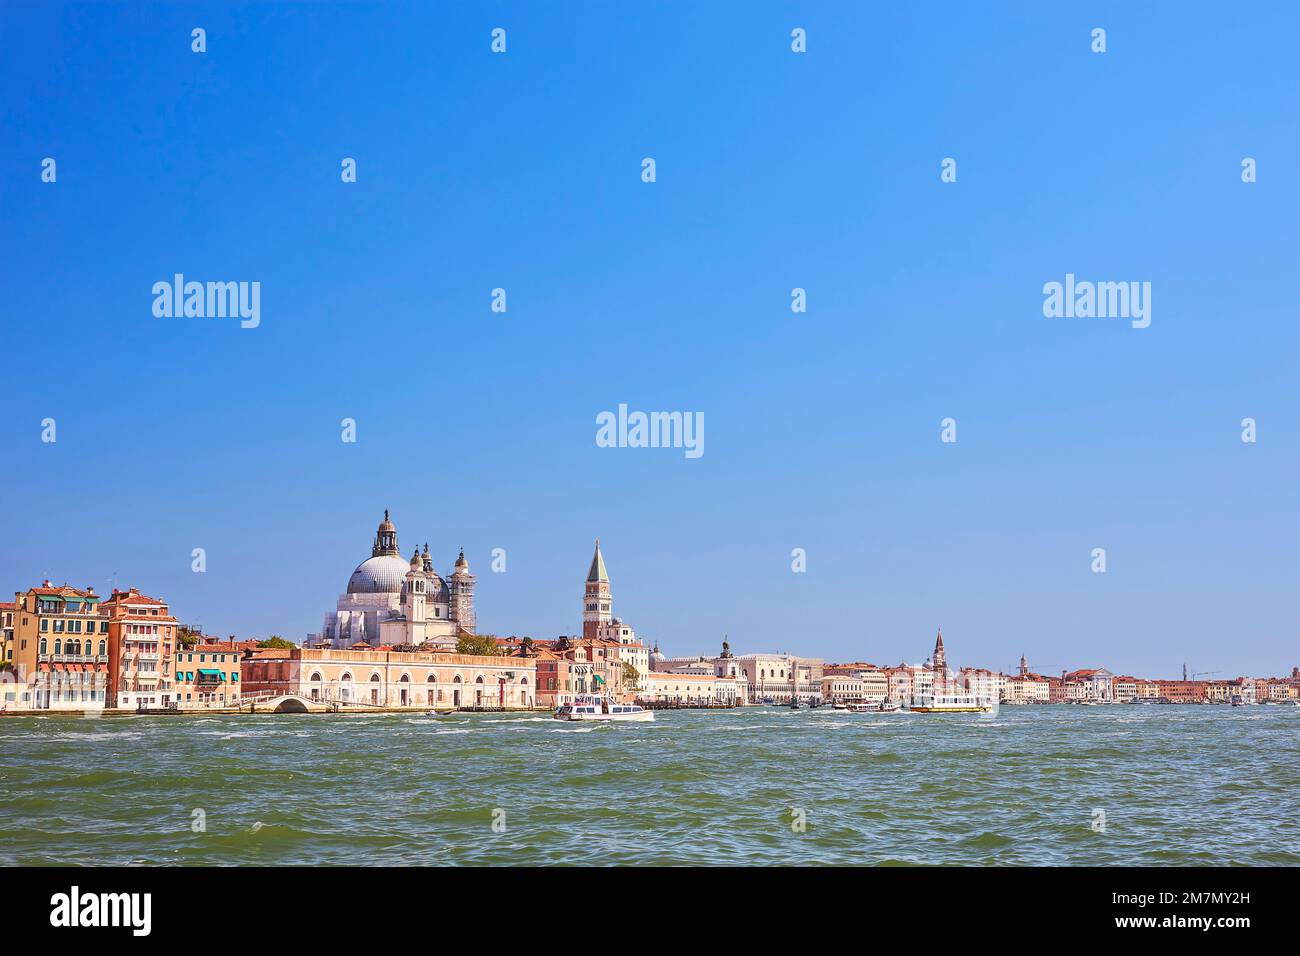 Directly on the Grand Canal is the baroque church of Santa Maria della Salute, built from 1631 by Baldassare Longhena, consecrated in 1687, not far from it the Doge's Square and the free-standing bell tower Campanile di San Marco Stock Photo